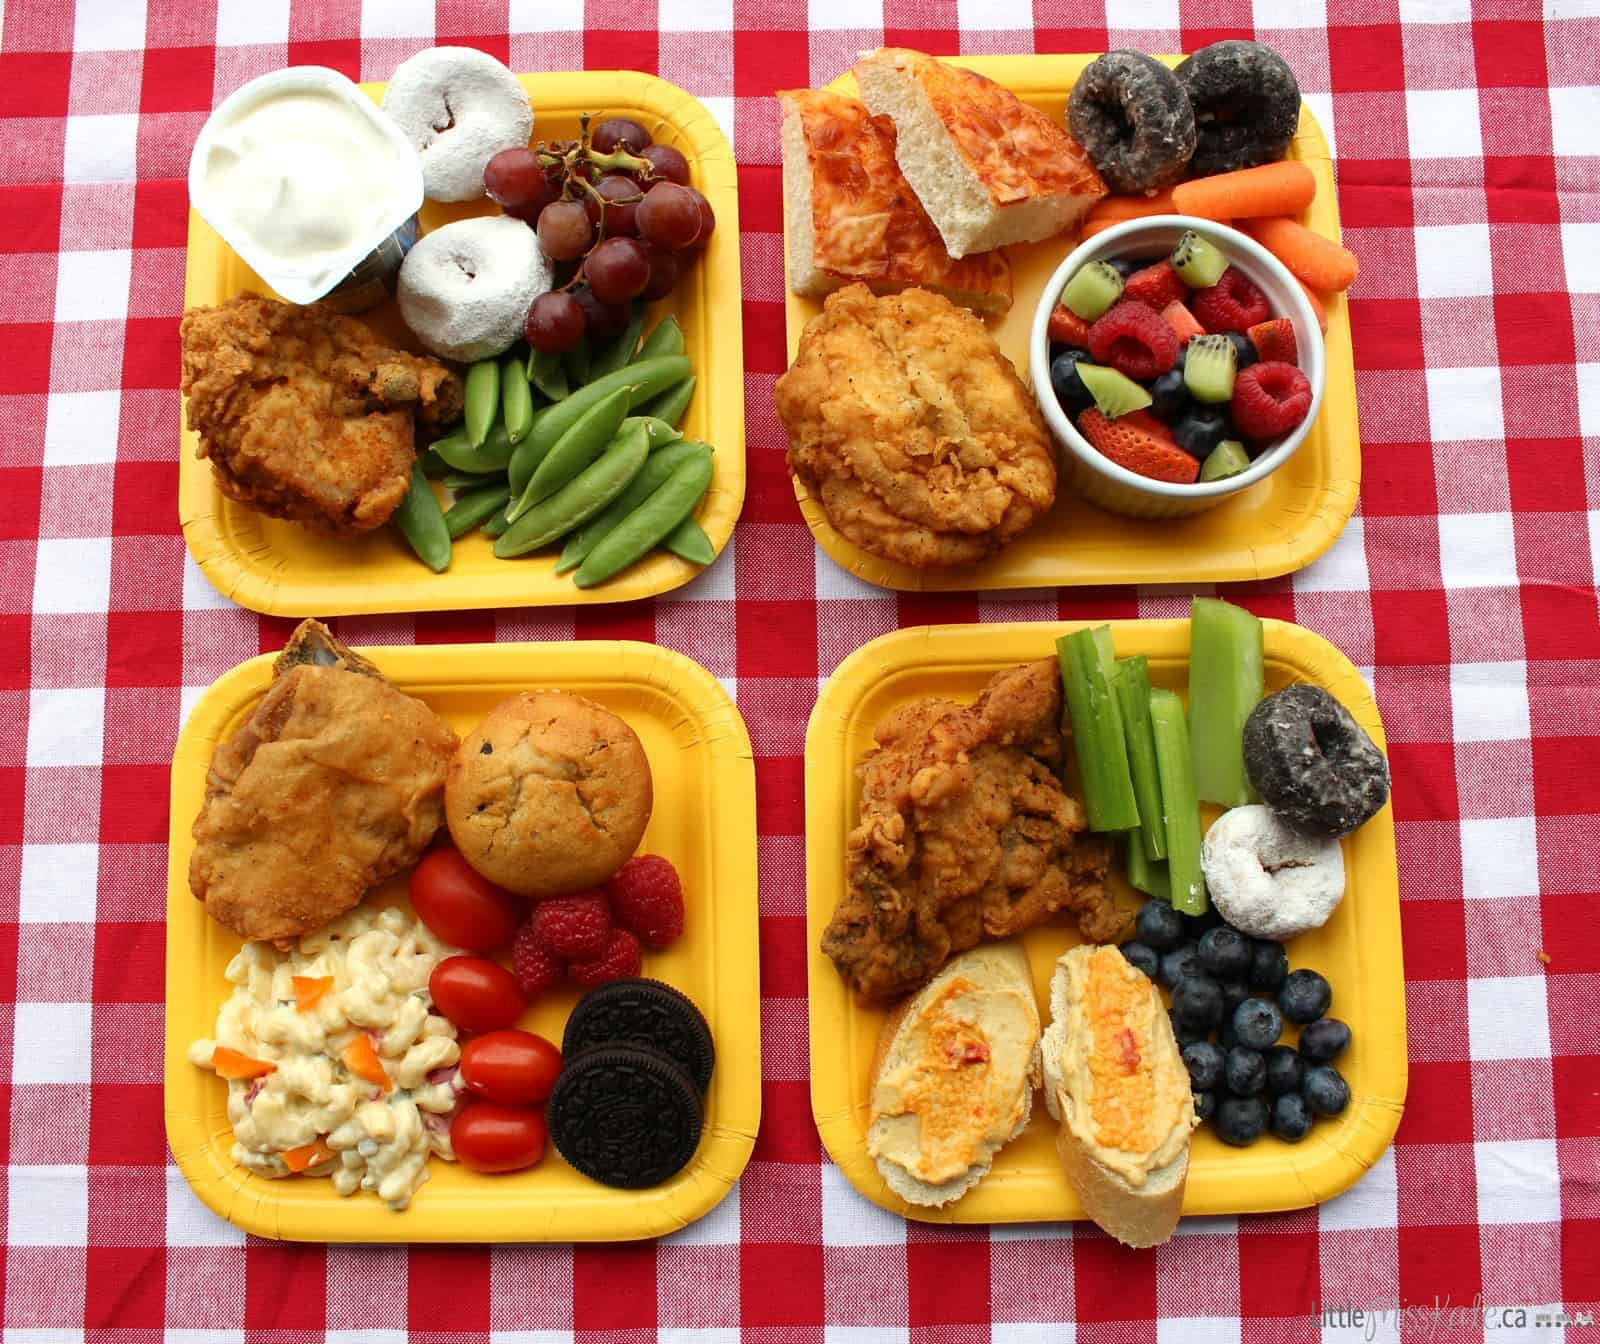 Picnic Dinner Ideas
 Easy Store bought 5 Minute Picnic Meal Ideas Little